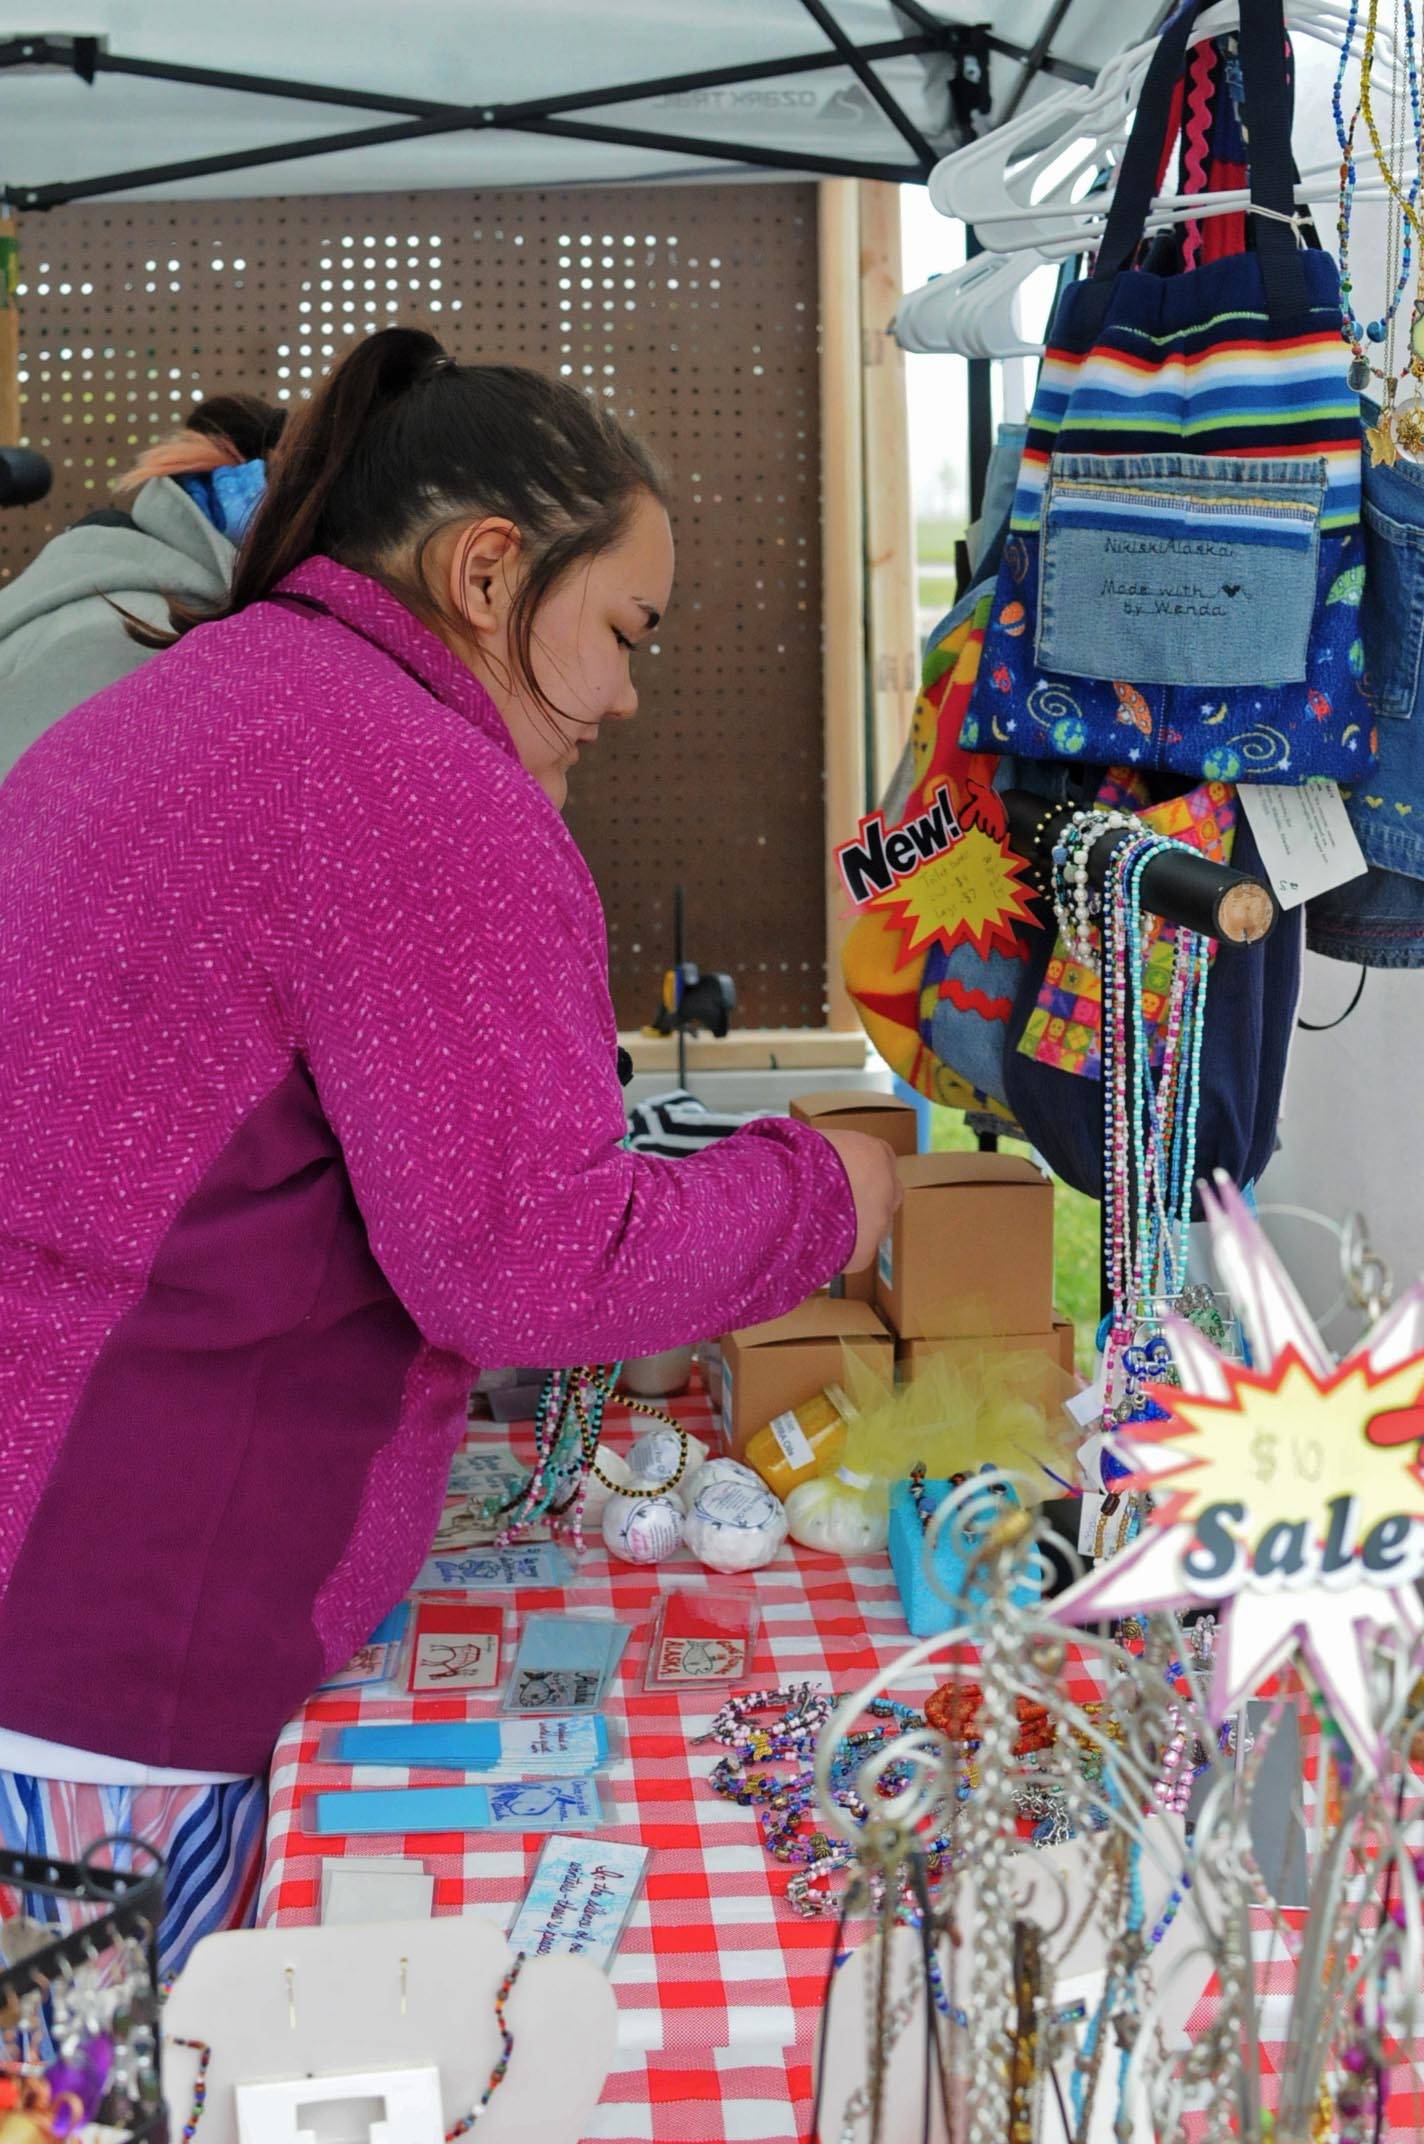 Vanessa Lopez of Nikiski arranges necklaces on a rack at the stall for The Studio at the Kenai Saturday Market on Saturday, June 9, 2018 in Kenai, Alaska. The Kenai Chamber of Commerce coordinates the Saturday markets for farmers and craftspeople on the lawn at the Kenai Visitors and Cultural Center every Saturday during the summer. (Photo by Elizabeth Earl/Peninsula Clarion)